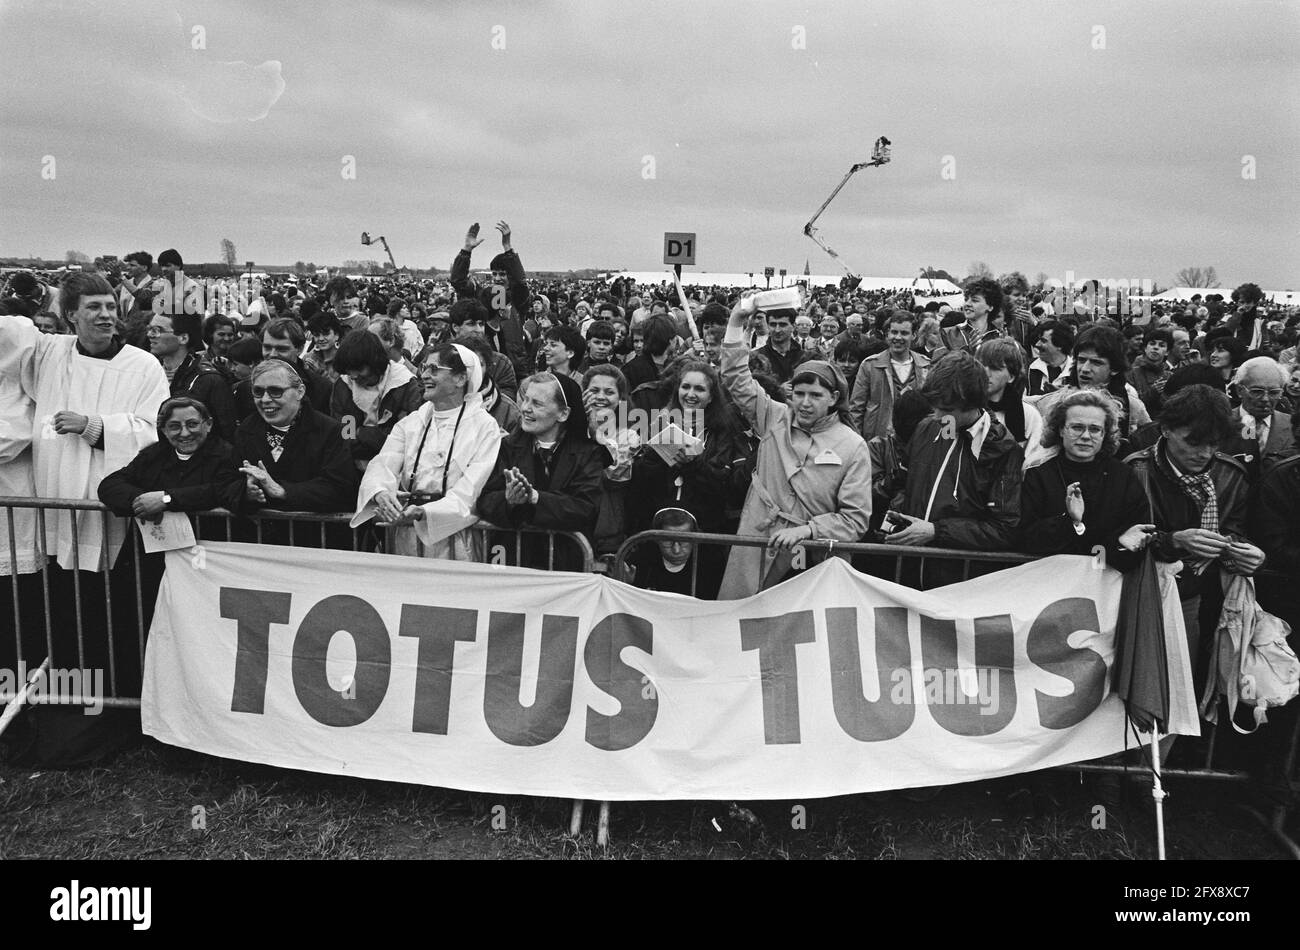 Visit Pope John Paul II to the Netherlands; Eucharist at Beek Airport; participants with banner Totus Tuus, May 14, 1985, visits, popes, airports, The Netherlands, 20th century press agency photo, news to remember, documentary, historic photography 1945-1990, visual stories, human history of the Twentieth Century, capturing moments in time Stock Photo